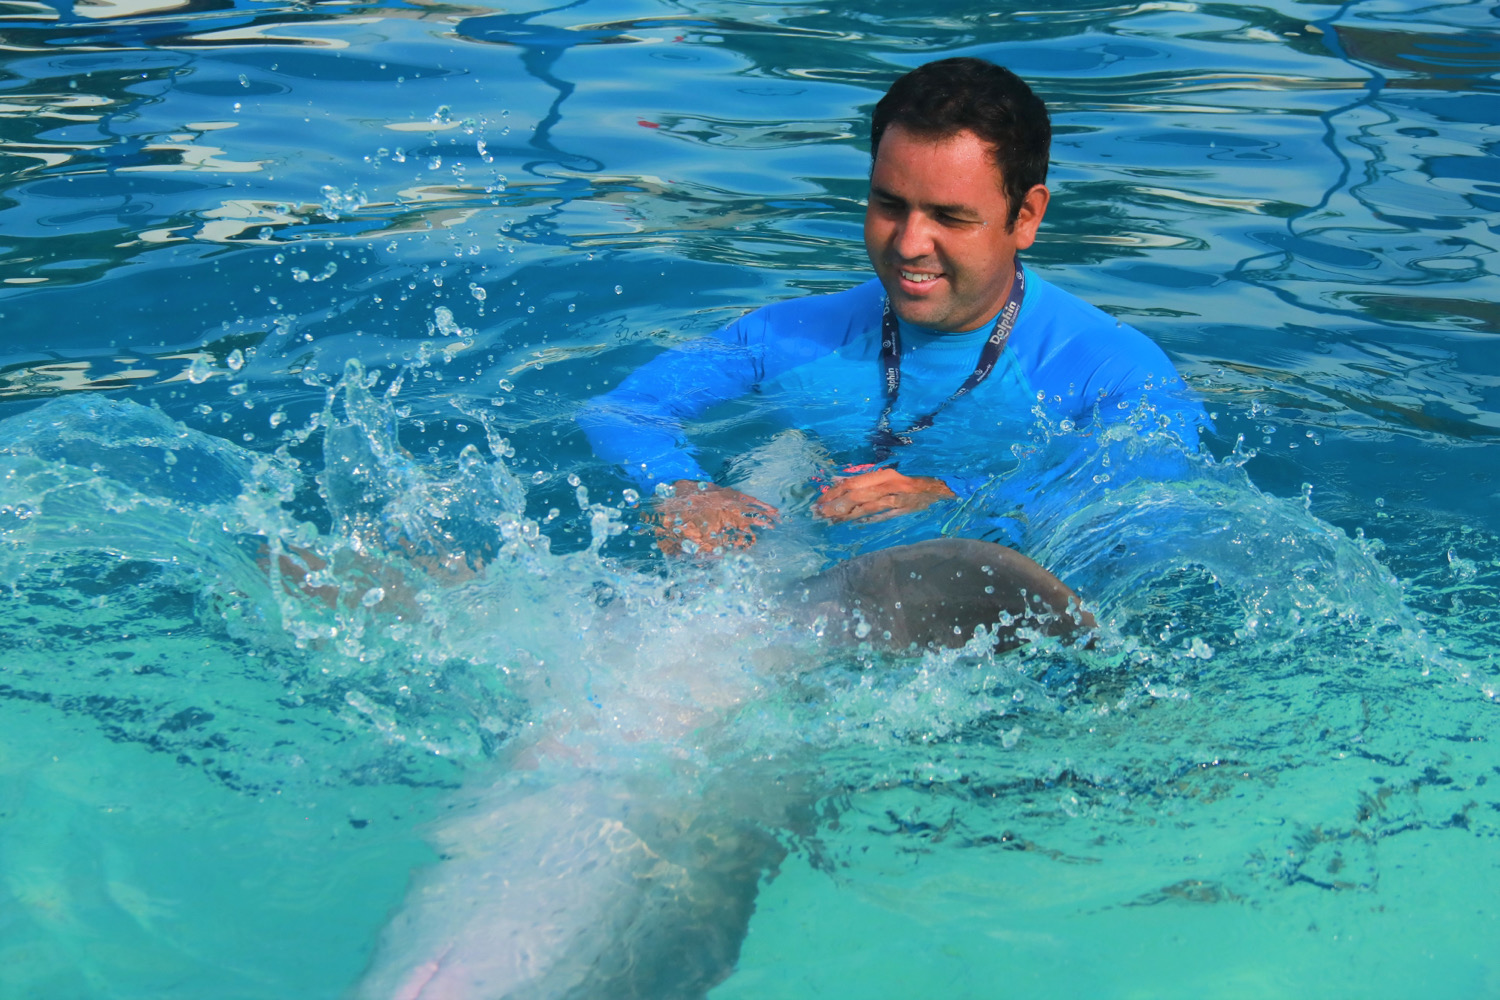 what-should-i-study-to-take-care-of-dolphins